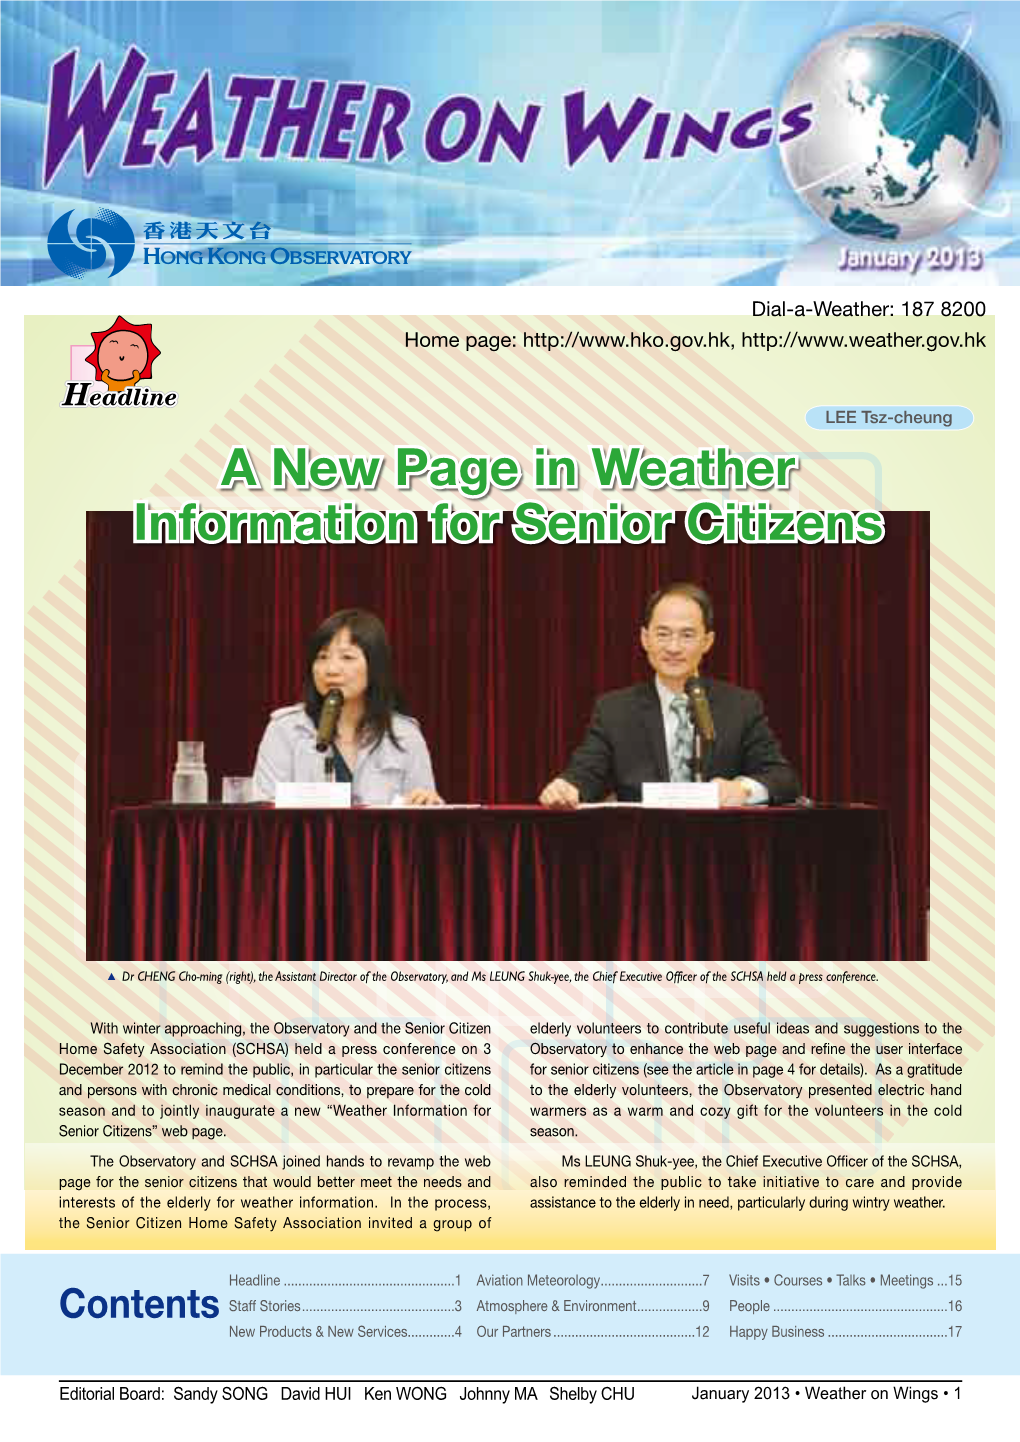 A New Page in Weather Information for Senior Citizens